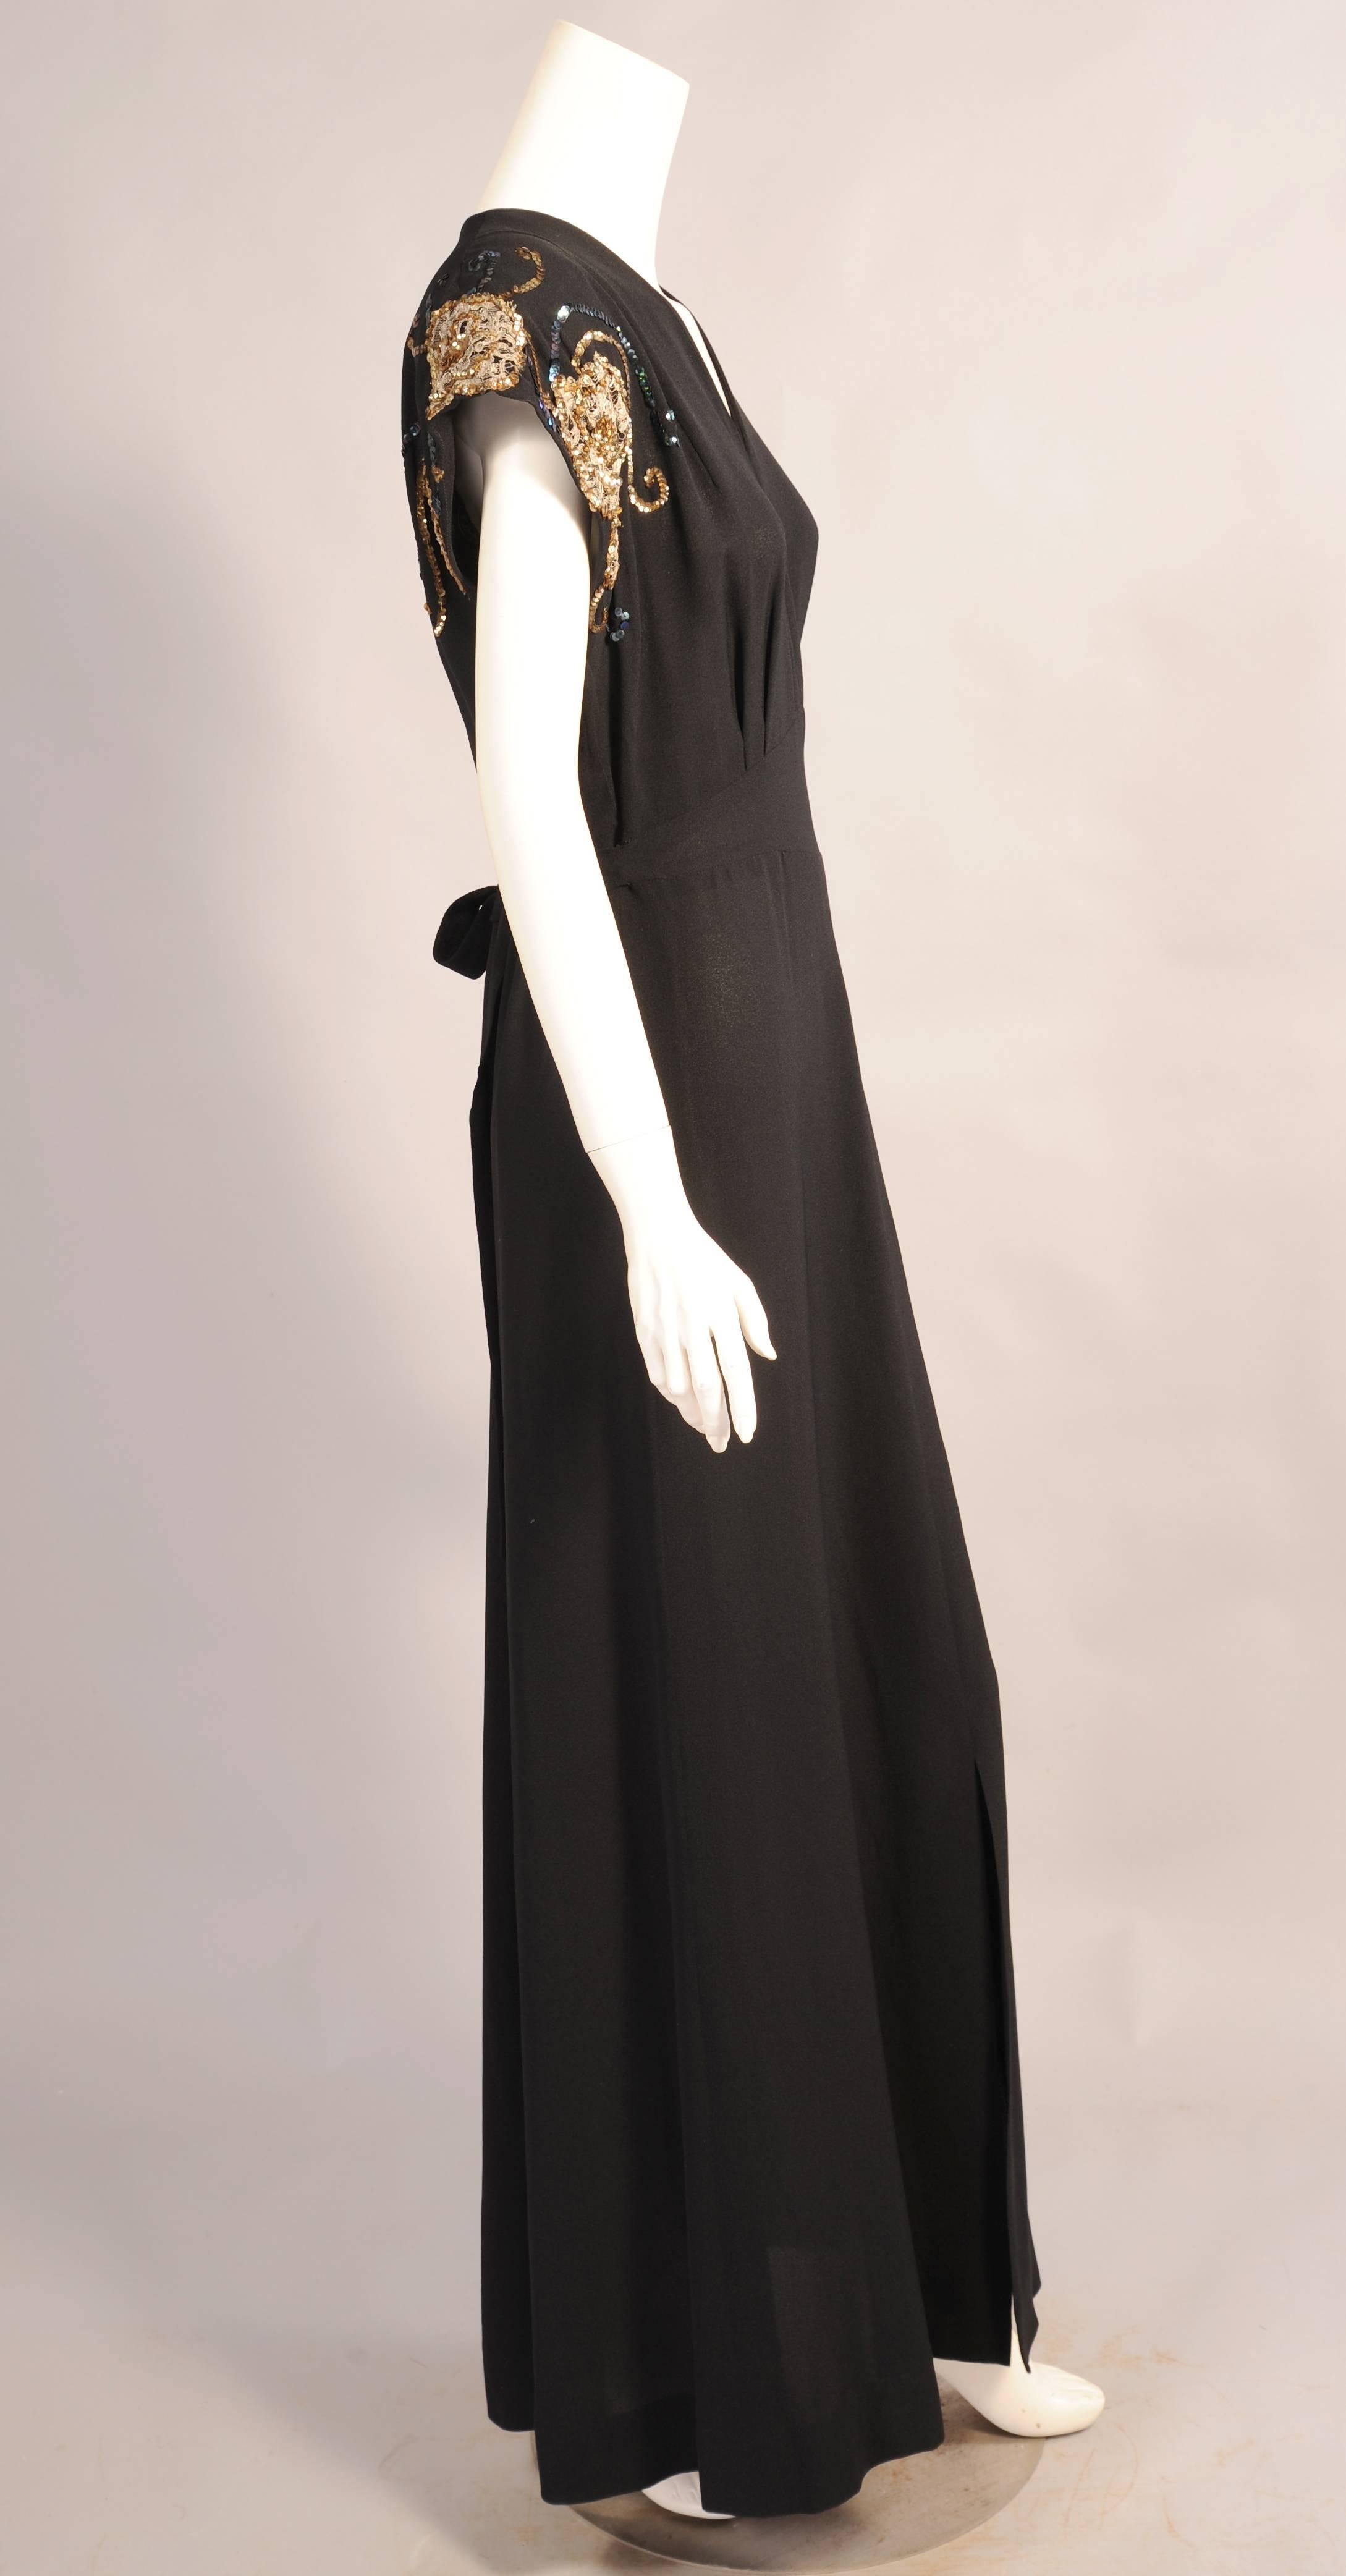 Elegant and easy to wear this black crepe dress from the late 1930's or very early 1940's  has a V shaped neckline and cap sleeves with metallic lace and sequin trim. The front of the dress has an attached cummerbund that ties in back. There is a